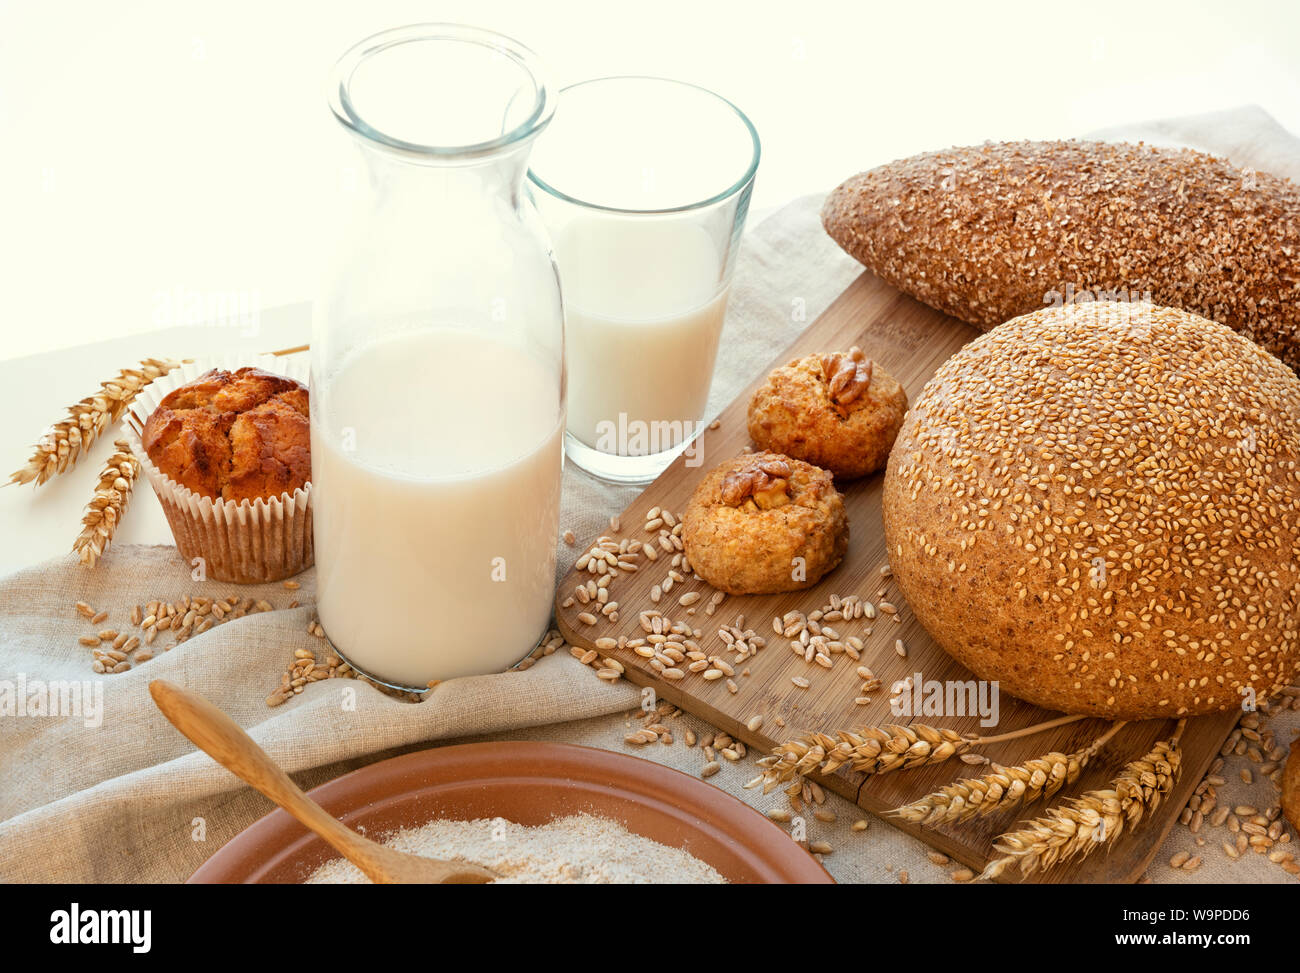 Still life of milk, breads, cupcake, biscuits, a plate of bran, spikelets of spelled and scattered poldba grains.  It is all on hemp cloth and on a wh Stock Photo